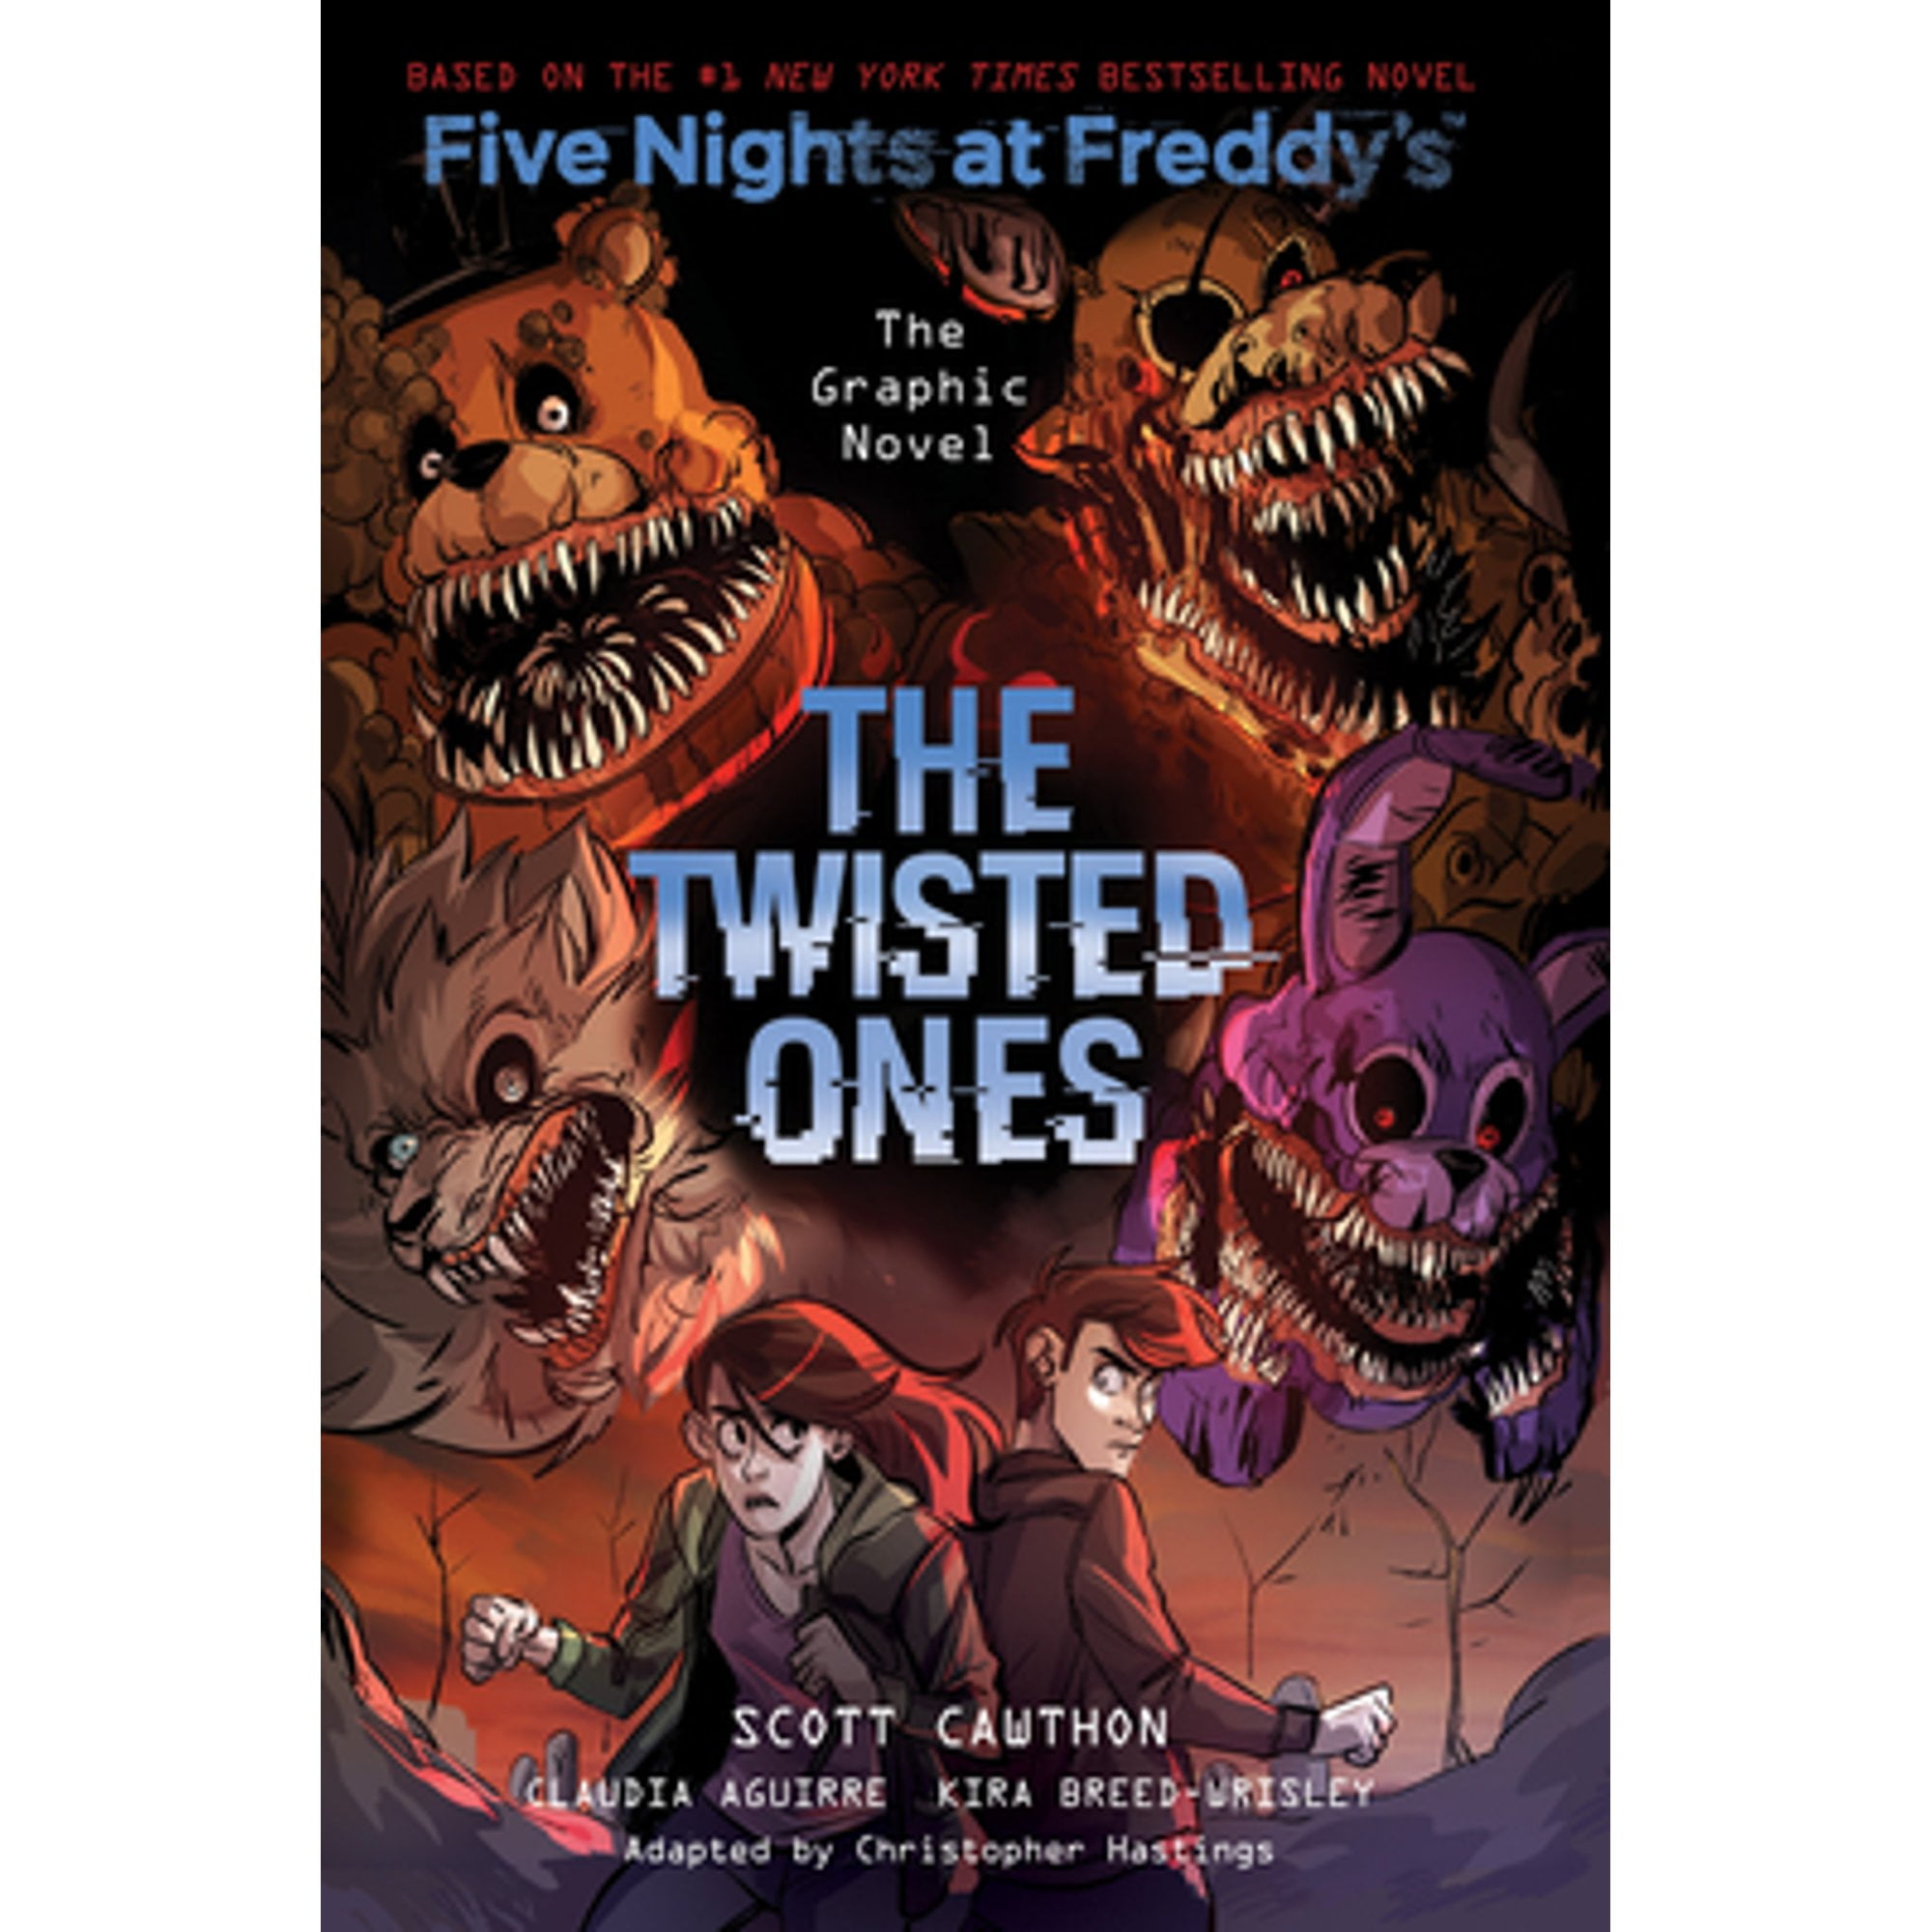 Pre-Owned The Twisted Ones: Five Nights at Freddy's (Five Nights at Freddy's Graphic Novel #2): (Hardcover) by Scott Cawthon, Kira Breed-Wrisley